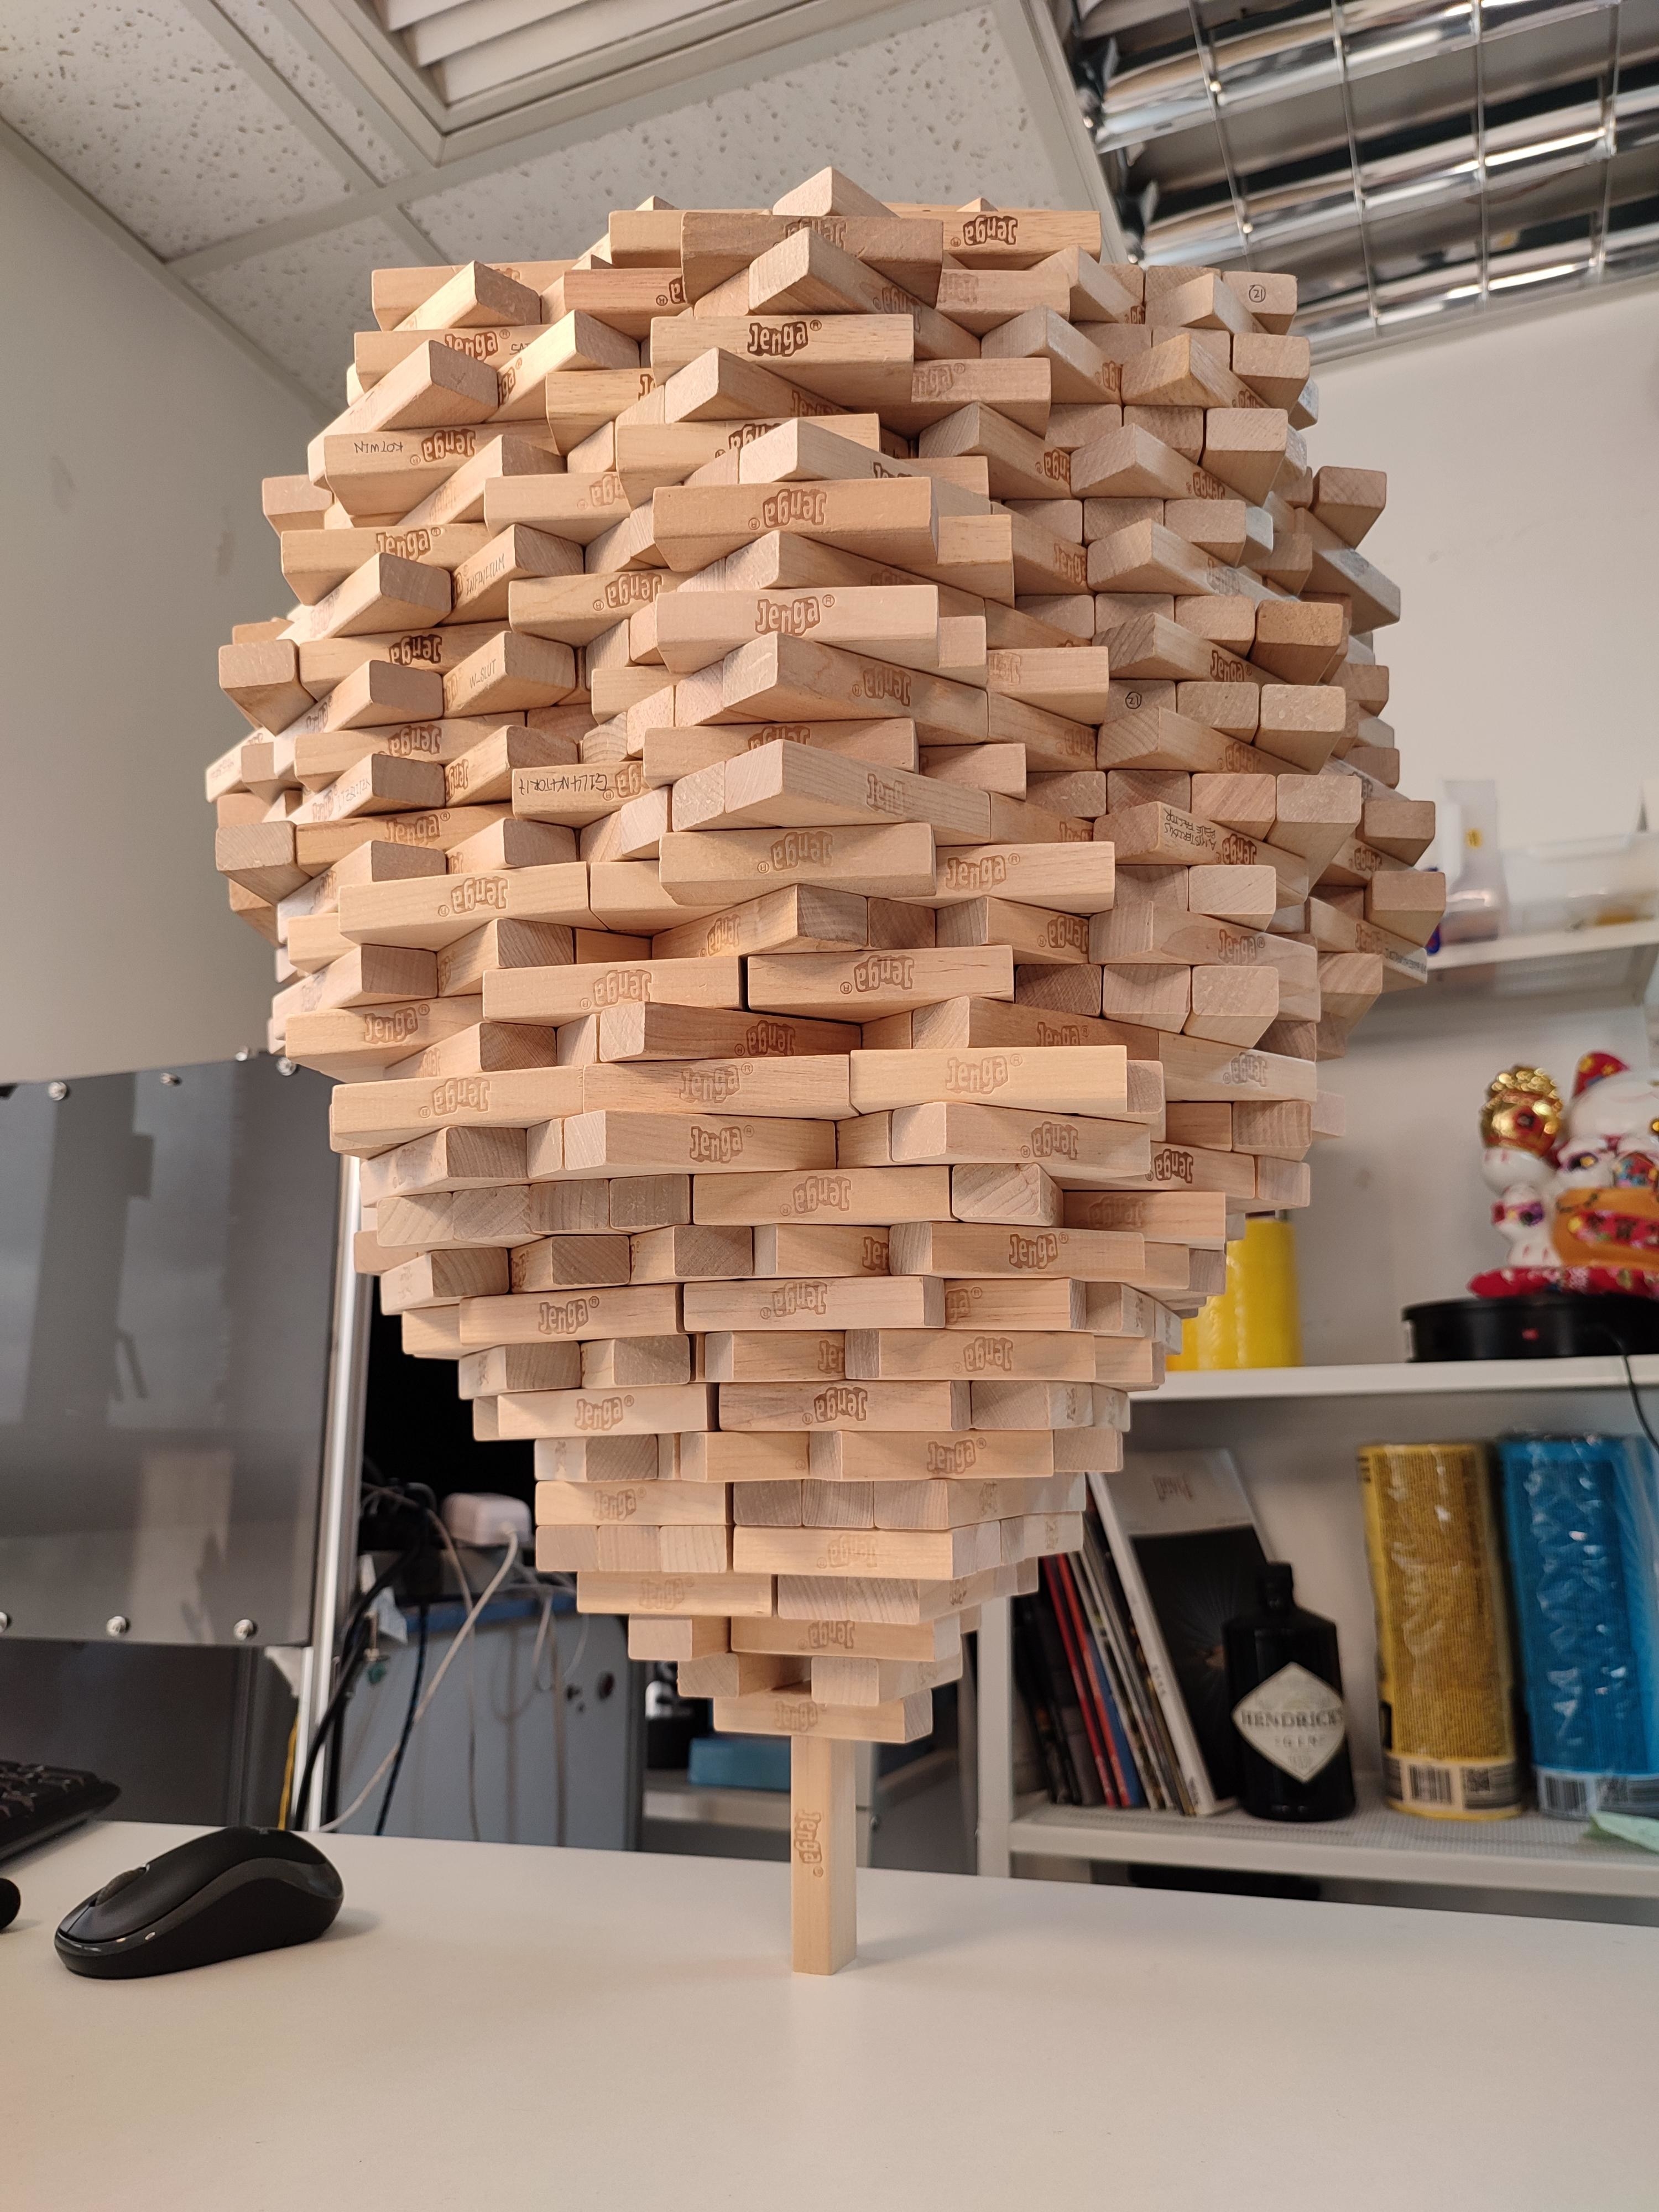 A large reverse pyramid of Jenga pieces set at angles on a table